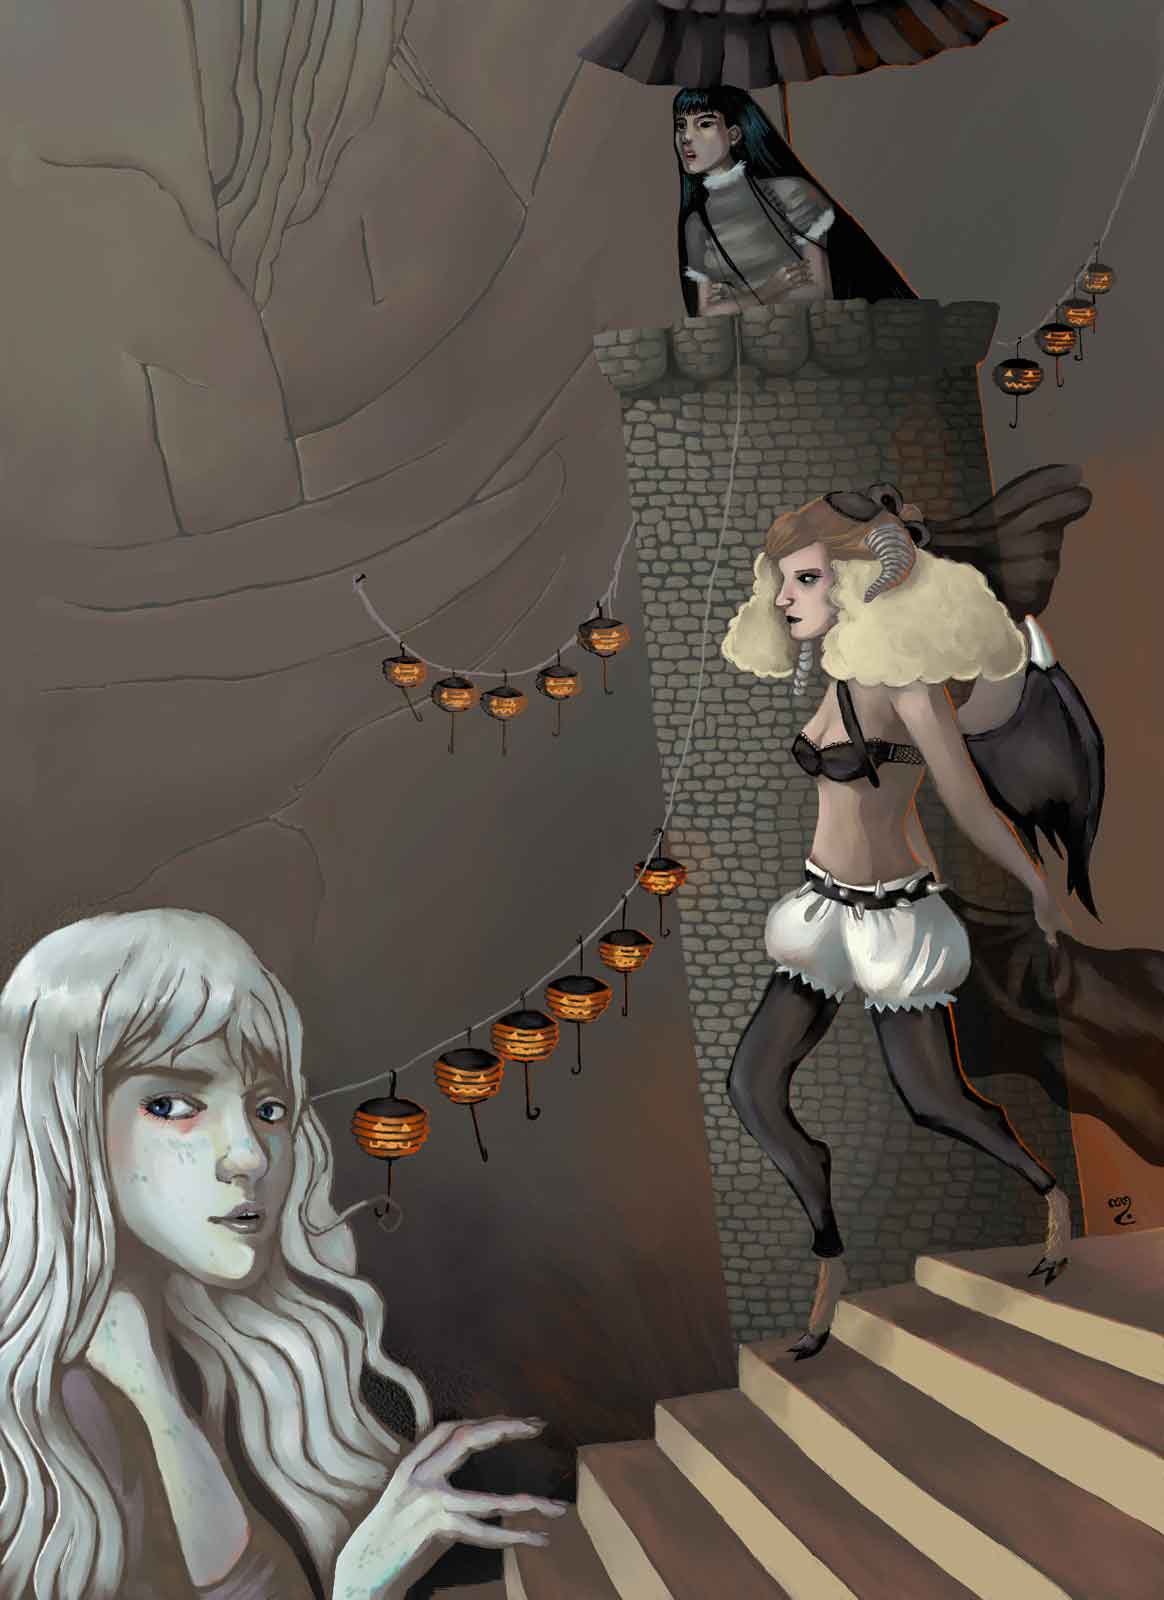 Surreal painting of a succubus descending stairs which a woman with grey blue skin uses as an inverted piano while a chinese singer sings at the top of a stylized tower in the background.